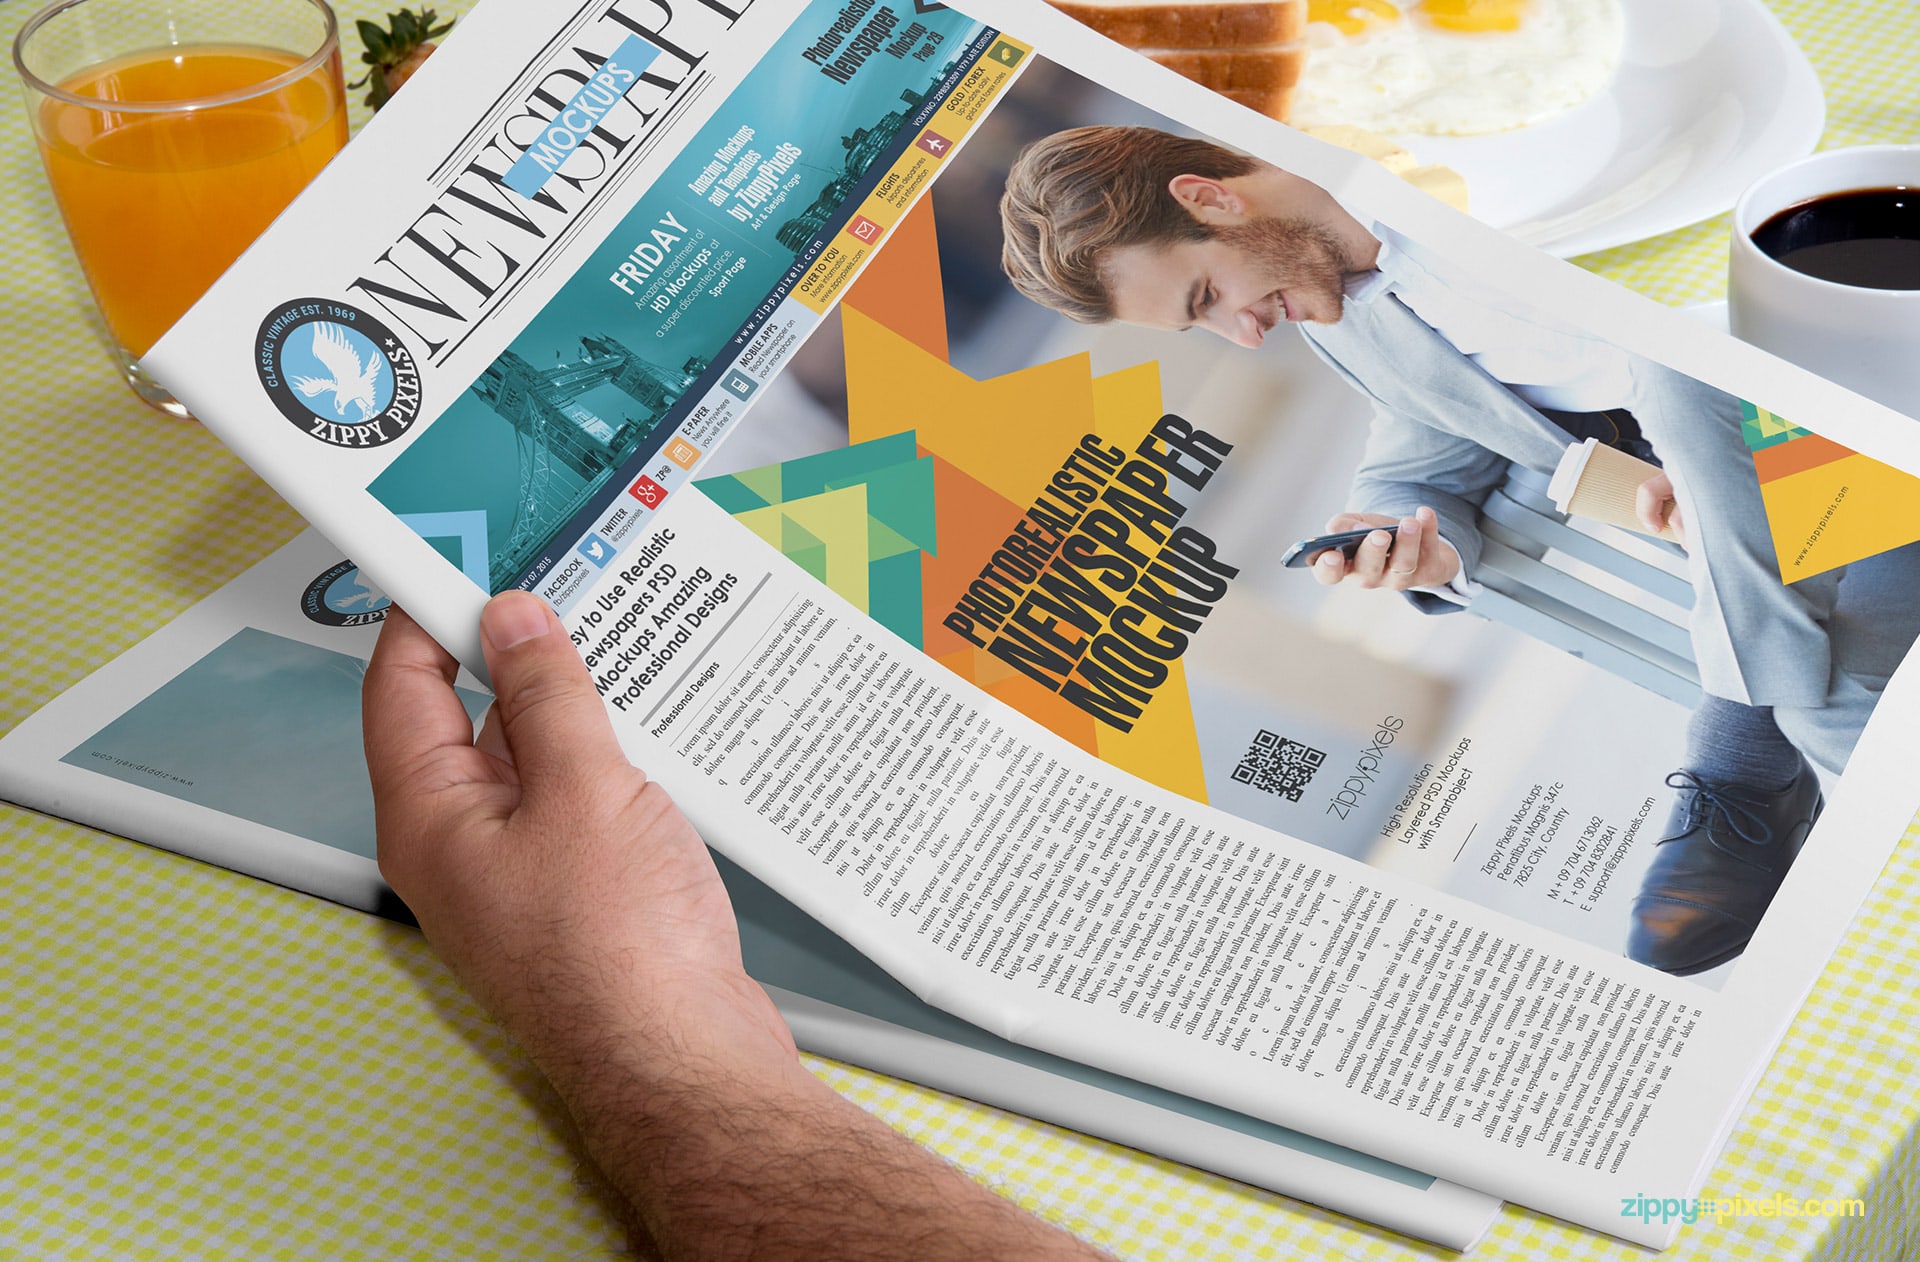 PSD advertising mockup of newspaper held in hand showing a large ad space